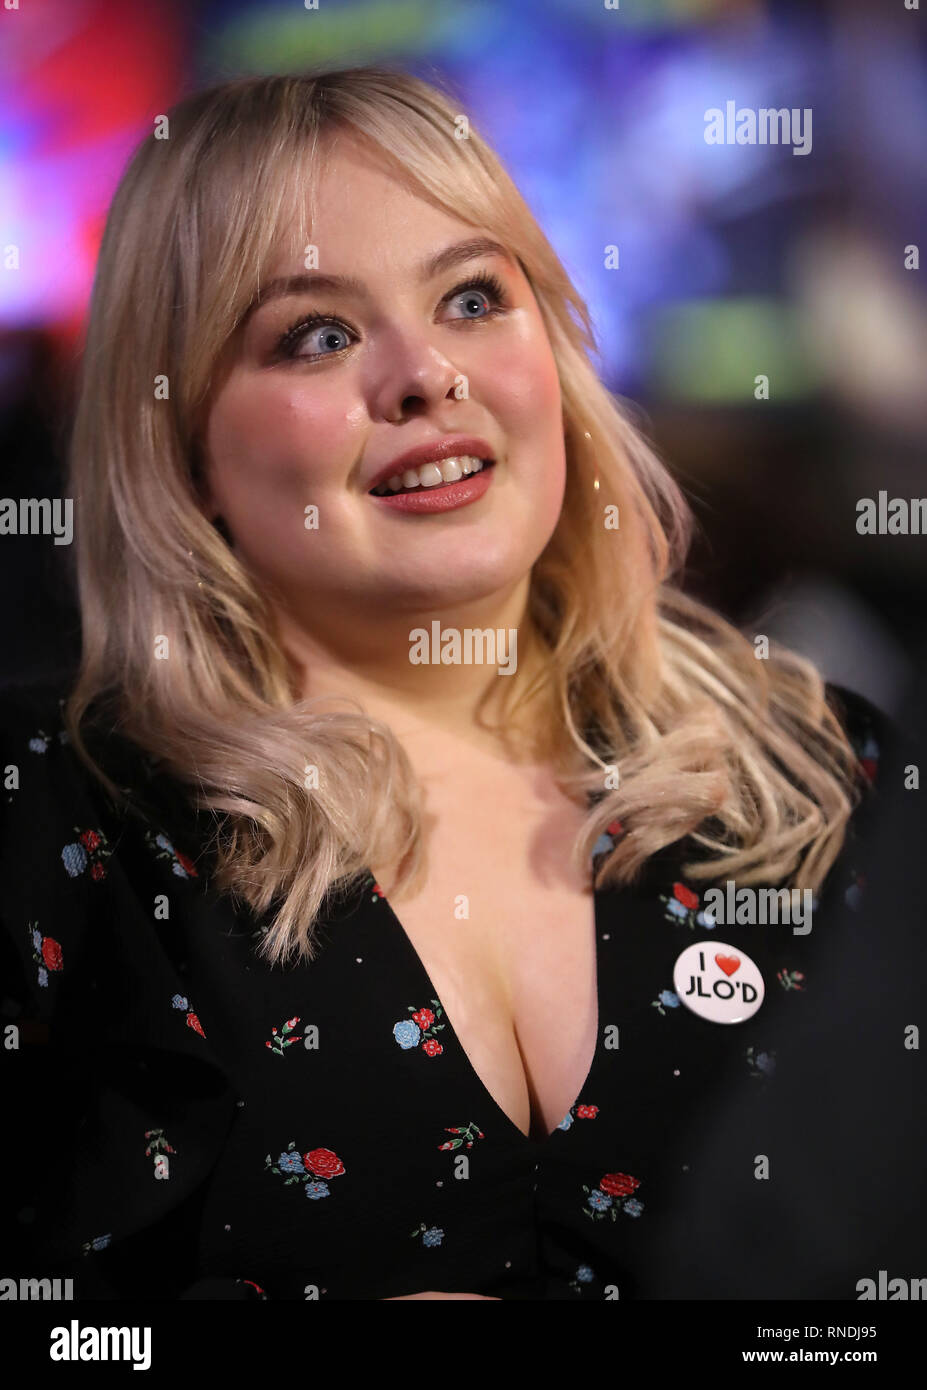 Nicola Coughlan arrives at the Omniplex Cinema in Londonderry for the Derry Girls premiere ahead of the broadcast of the second series on Channel 4. Stock Photo